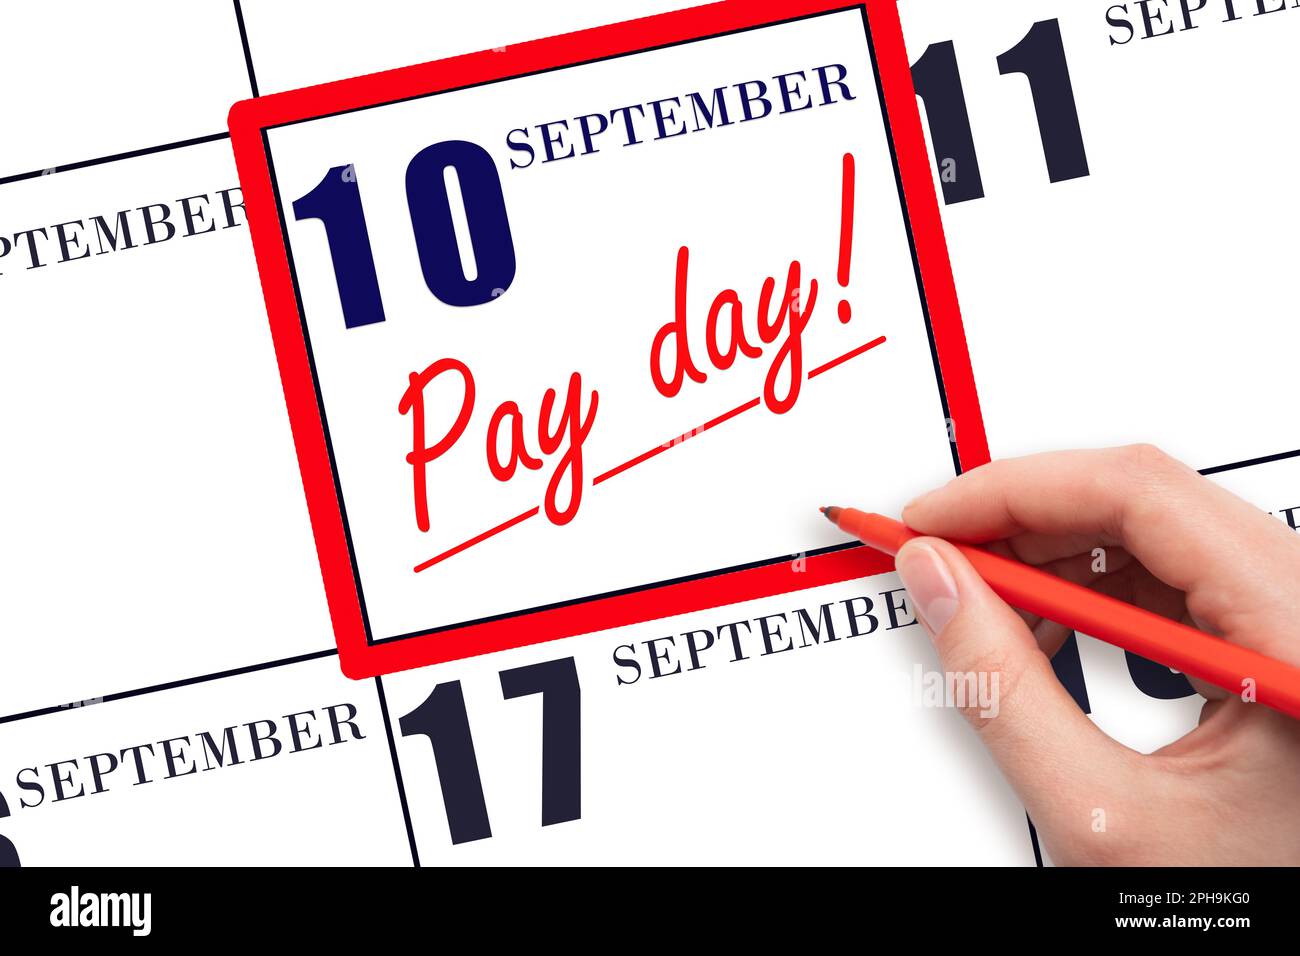 10th day of September. Hand writing text PAY DATE on calendar date September  10 and underline it. Payment due date.  Reminder concept of payment. Aut Stock Photo